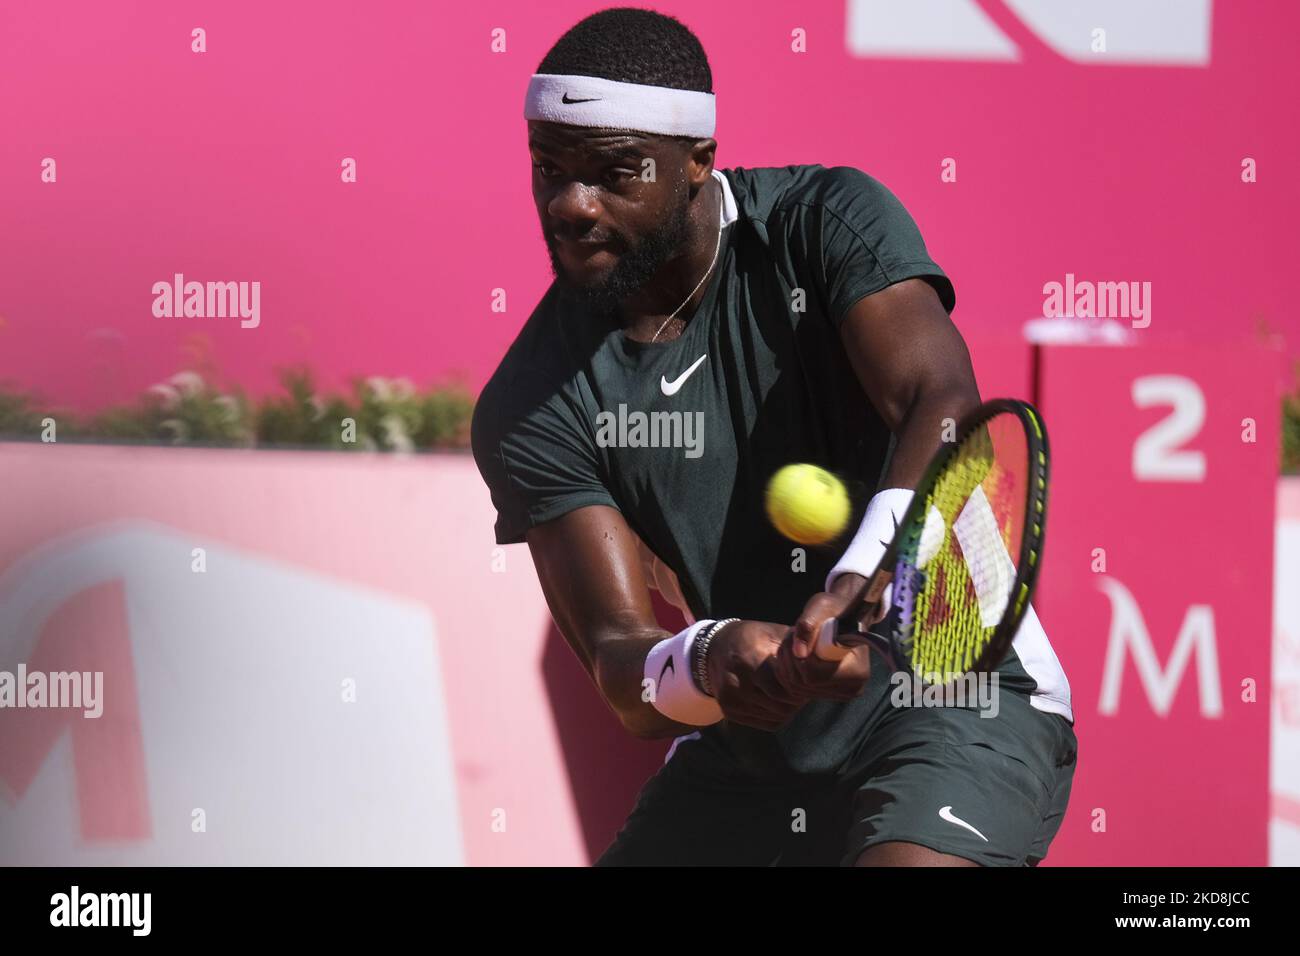 Nuno Borges from Portugal competes against Frances Tiafoe from United  States during the Millennium Estoril Open ATP 250 tennis tournament at  Estoril Tennis Club, Estoril, Portugal on April 27, 2022. (Photo by